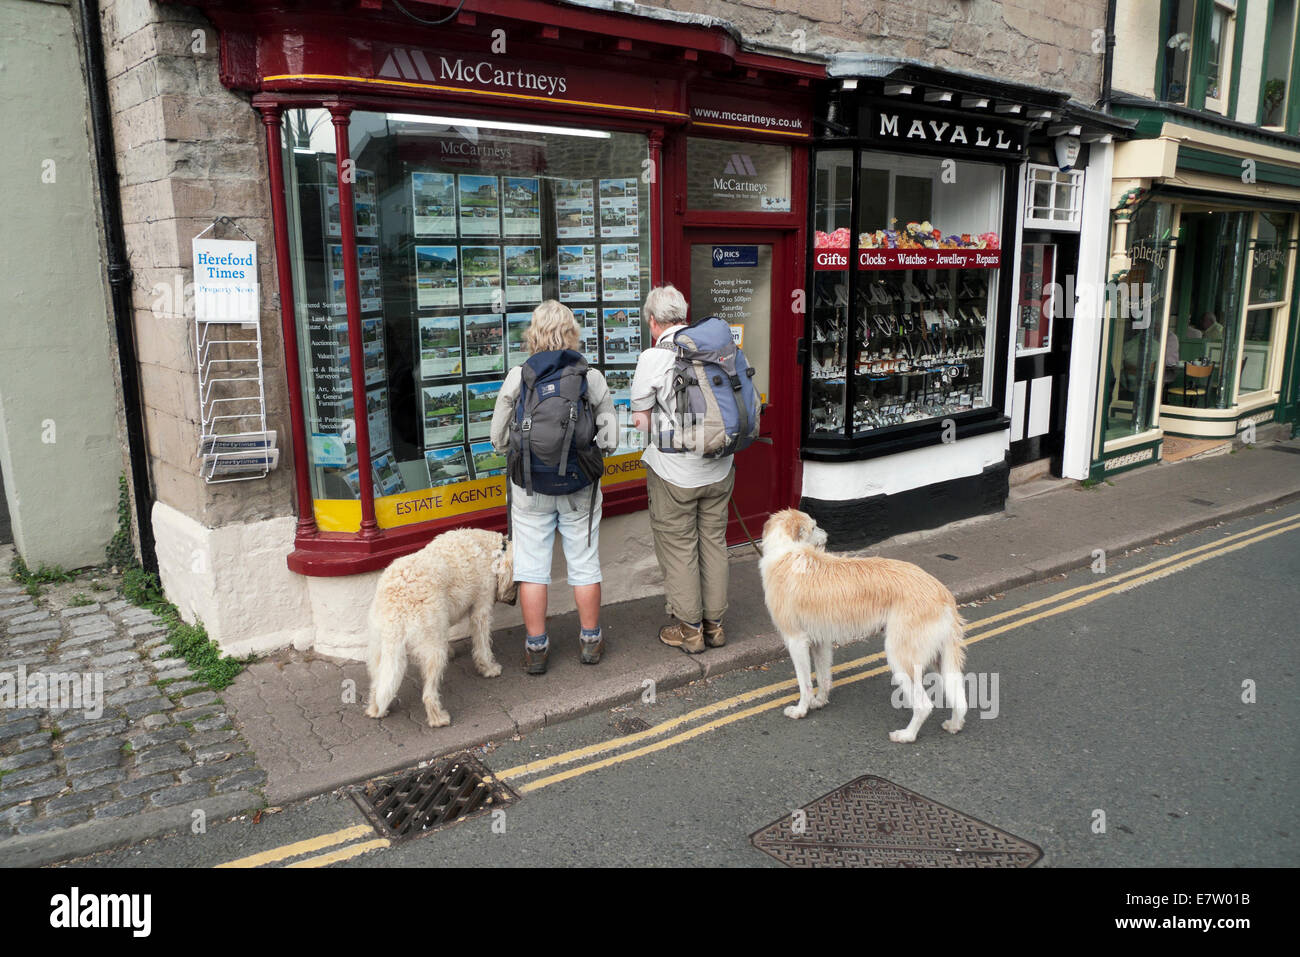 Rear back view of two older women seniors with rucksacks and dogs looking in an estate agent window in Hay-on-Wye Wales UK  KATHY DEWITT Stock Photo